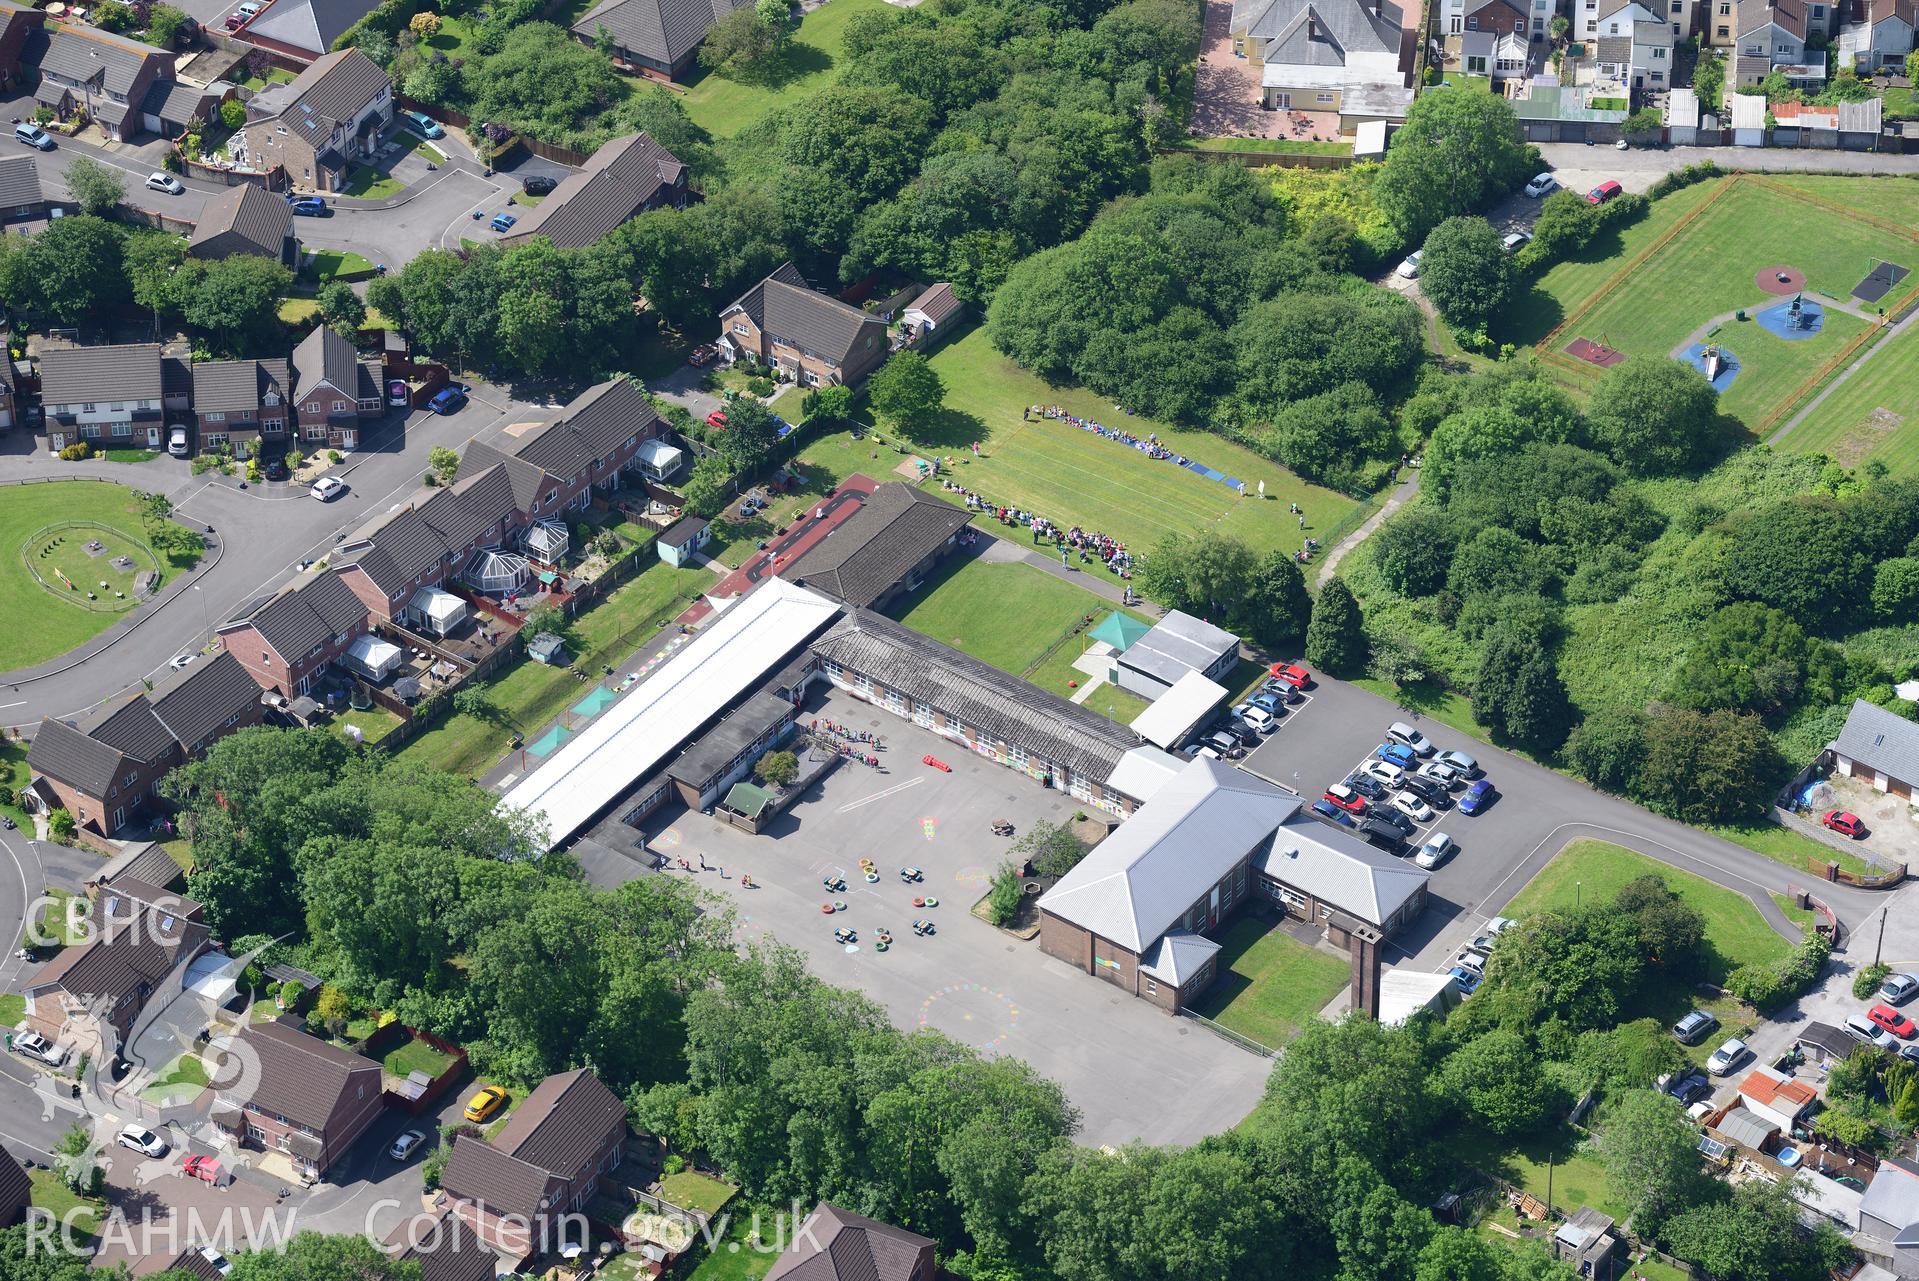 Mynydd Cynffig Infant School. Oblique aerial photograph taken during the Royal Commission's programme of archaeological aerial reconnaissance by Toby Driver on 19th June 2015.